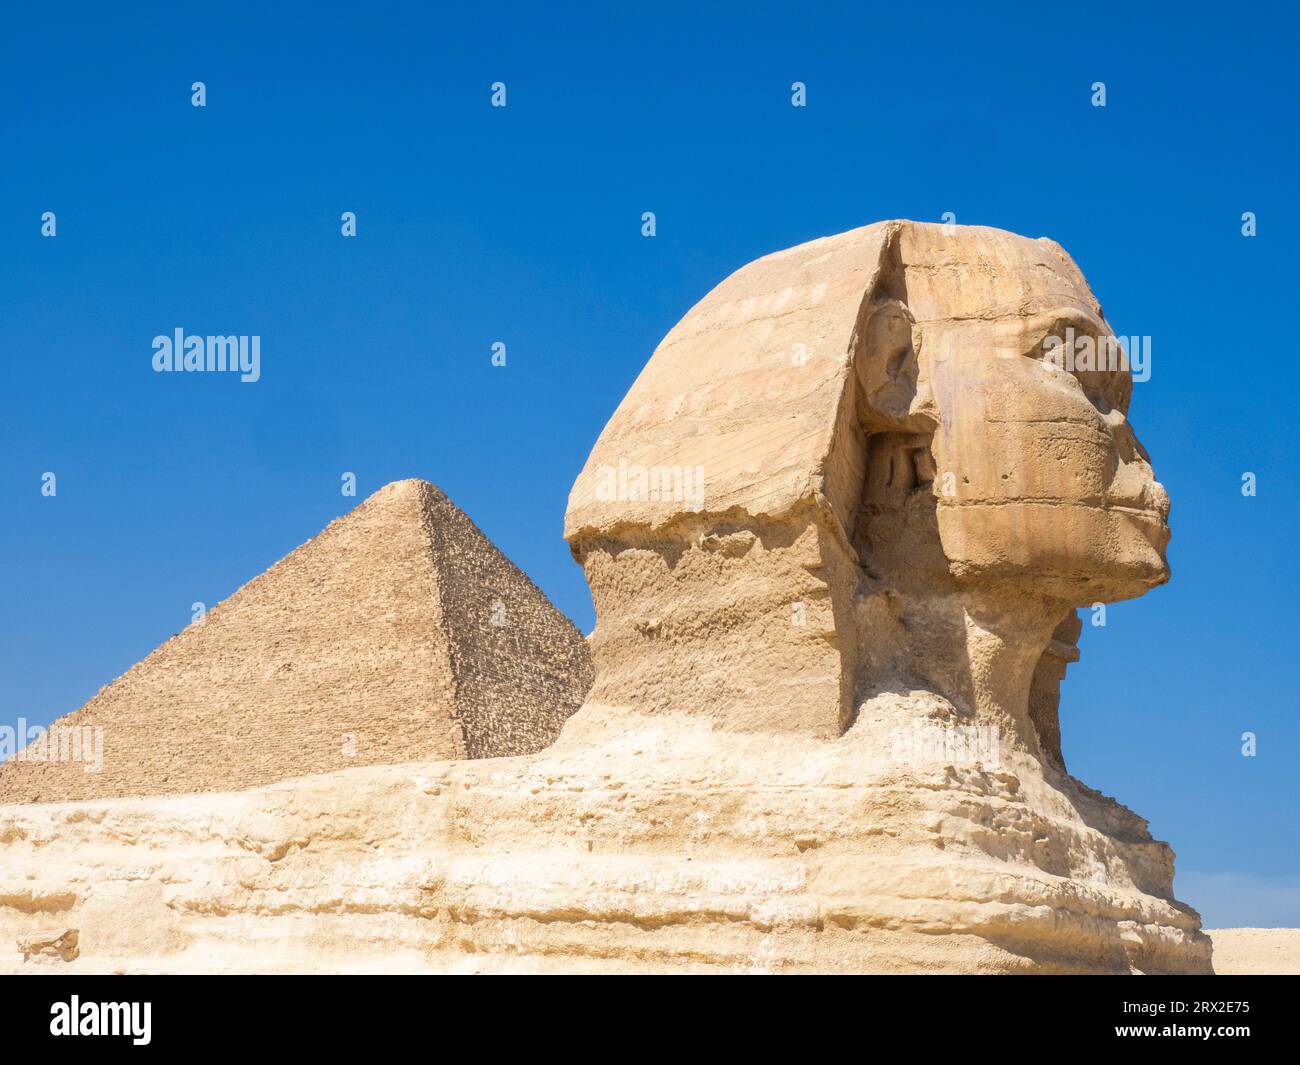 The Great Sphinx of Giza near the Great Pyramid of Giza, the oldest of ...